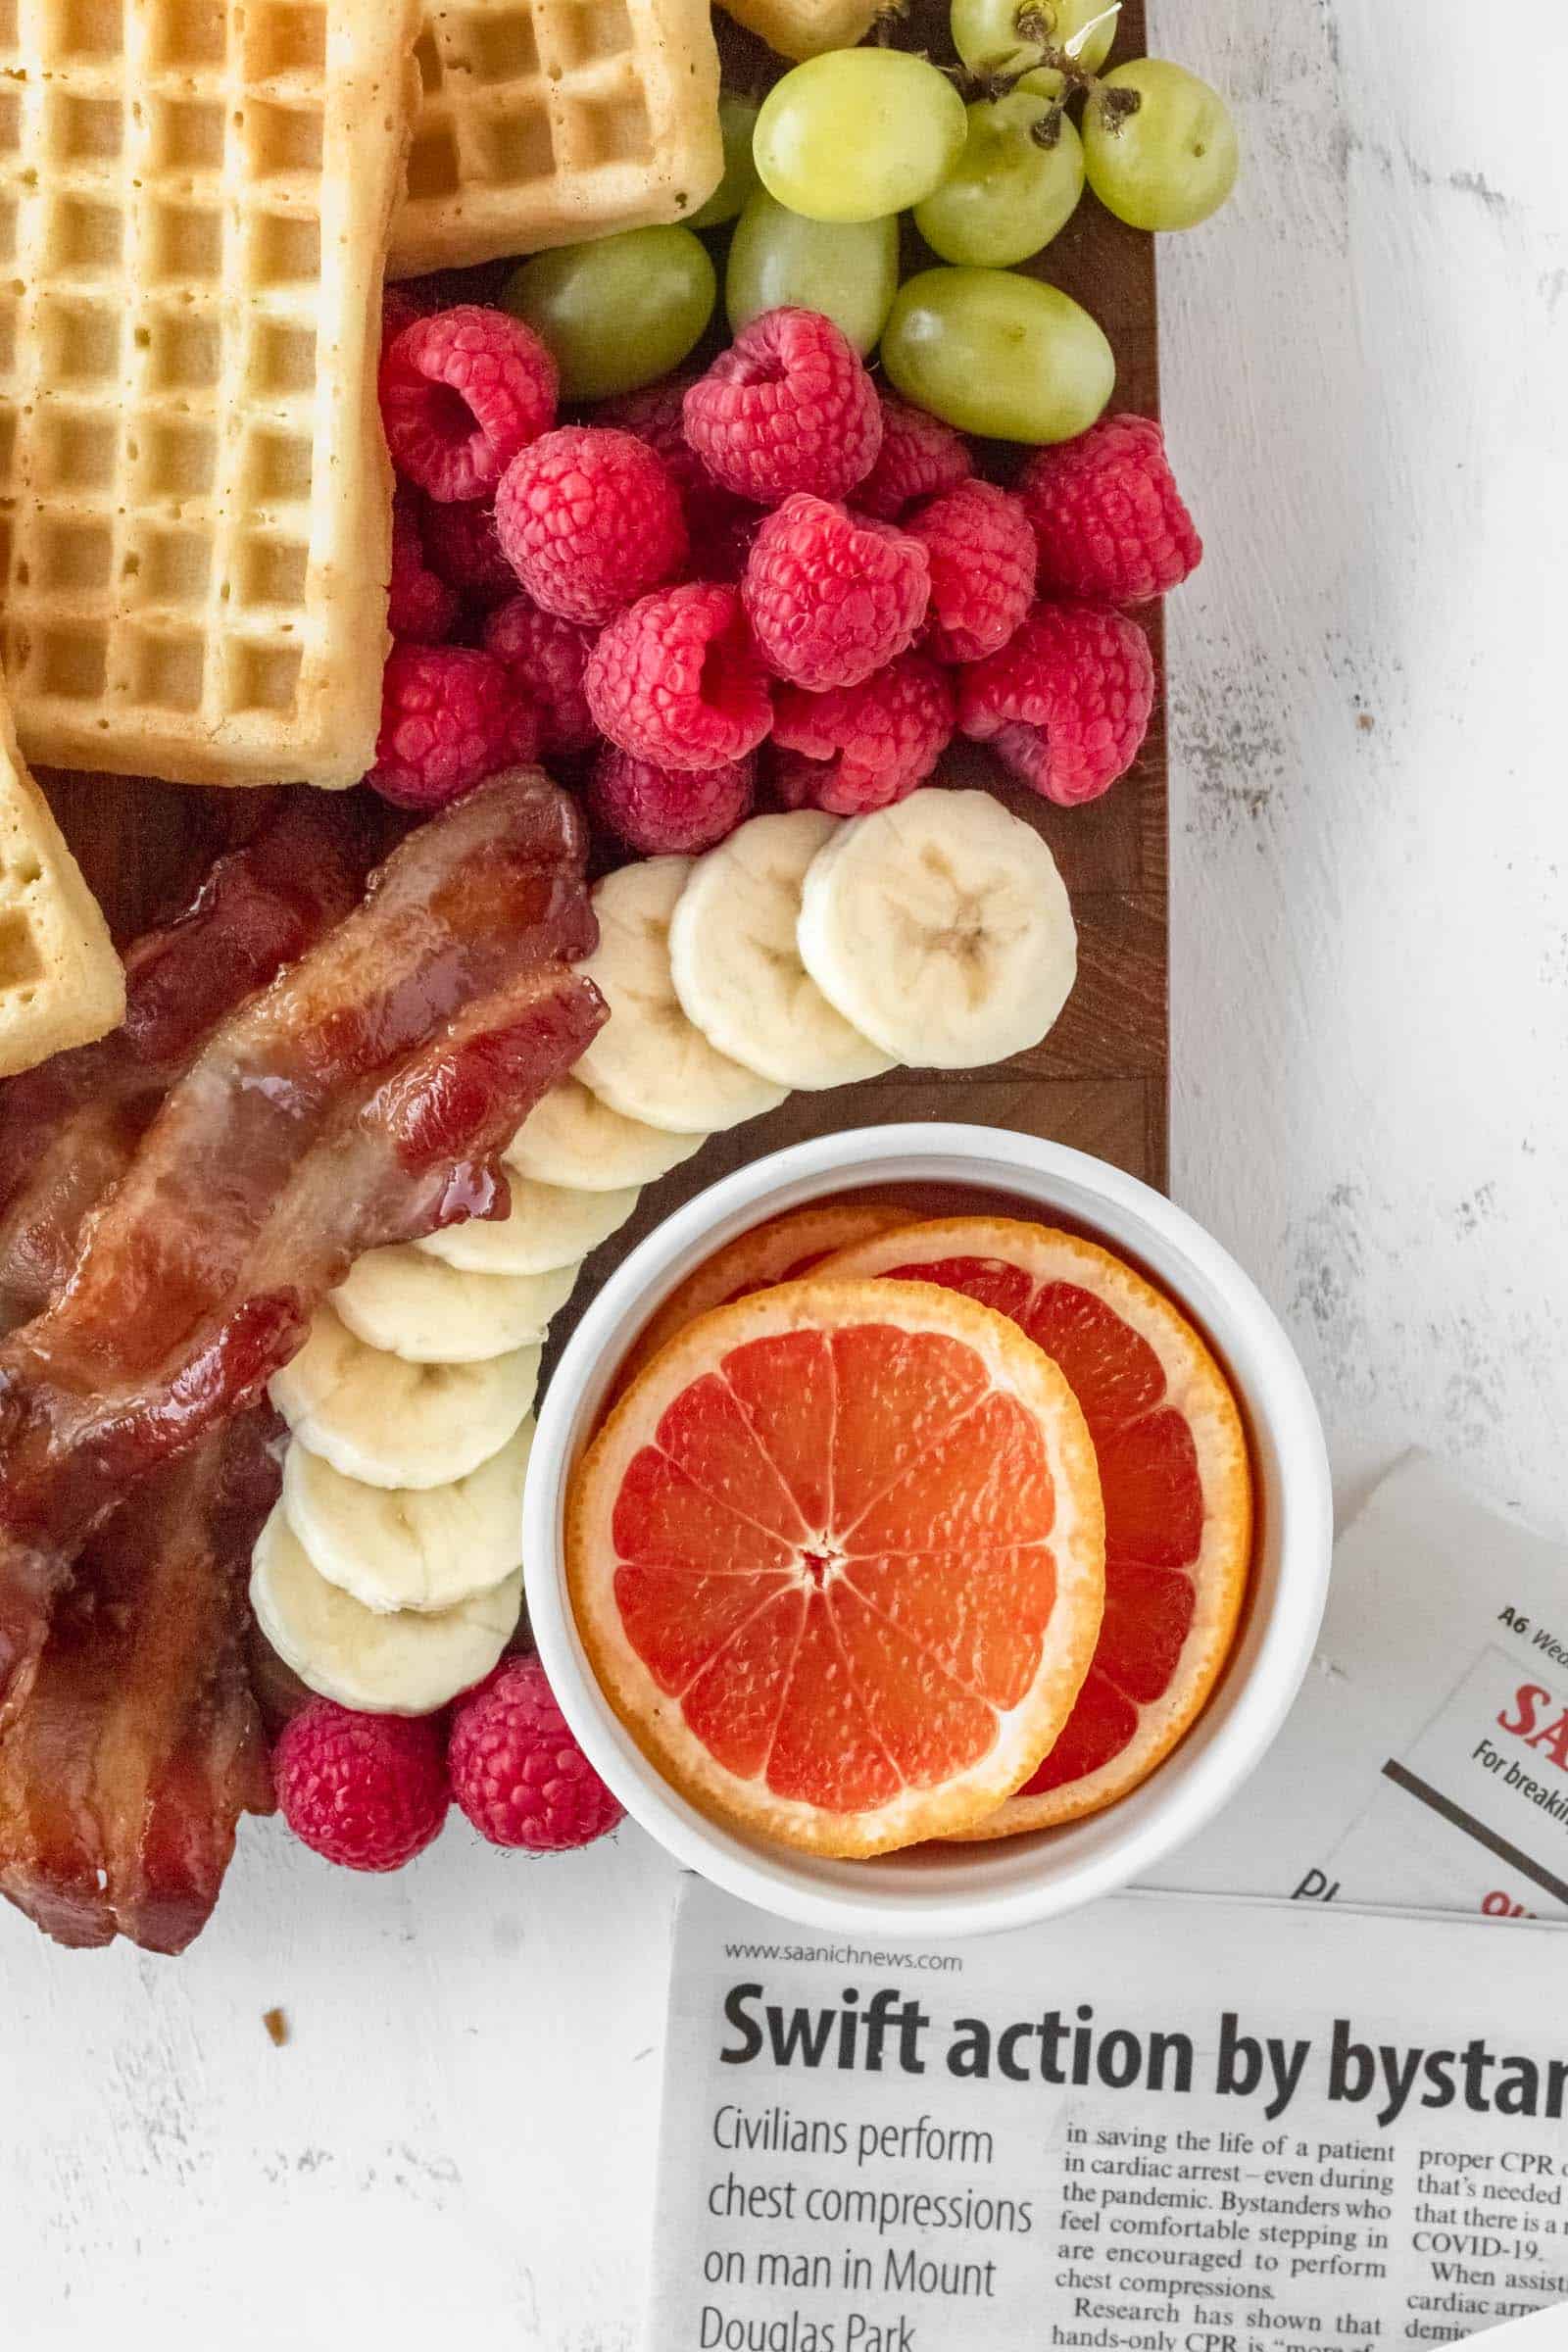 Green grapes, red raspberries, sliced bananas, oranges, and bacon on a breakfast charcuterie board